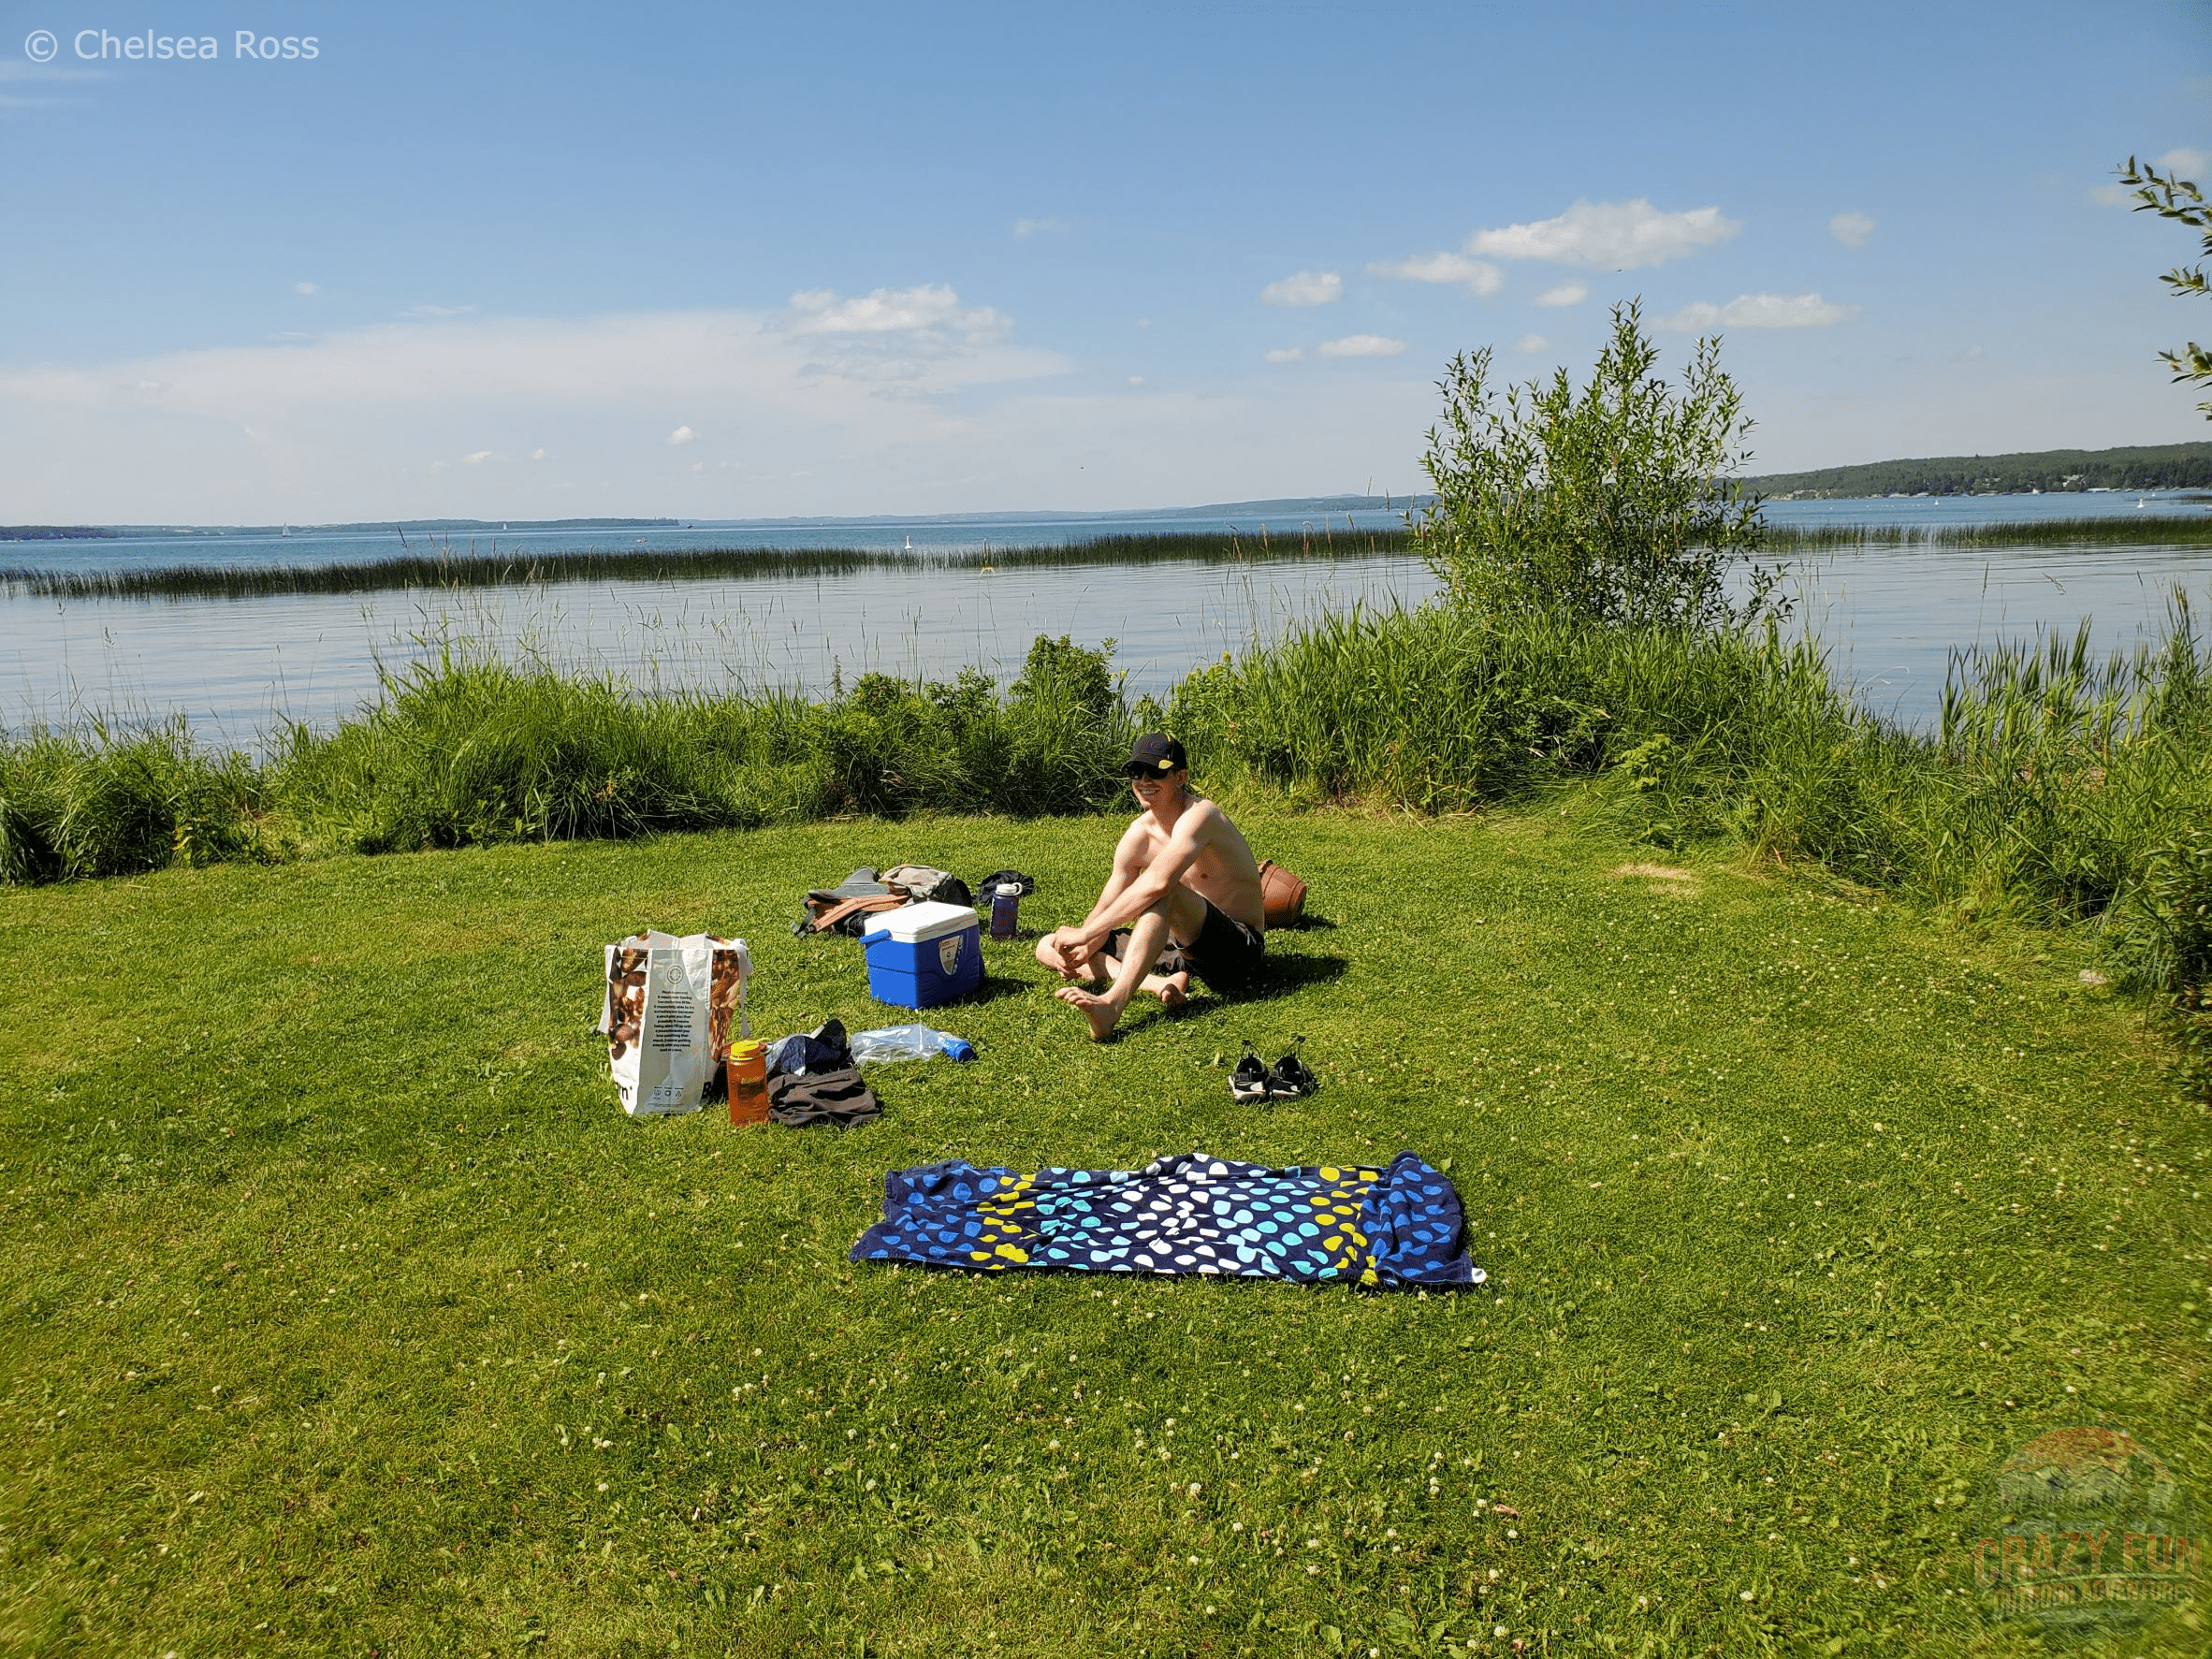 Scott in his swimsuit on the grass with a towel, cooler, food in front of Sylvan Lake.